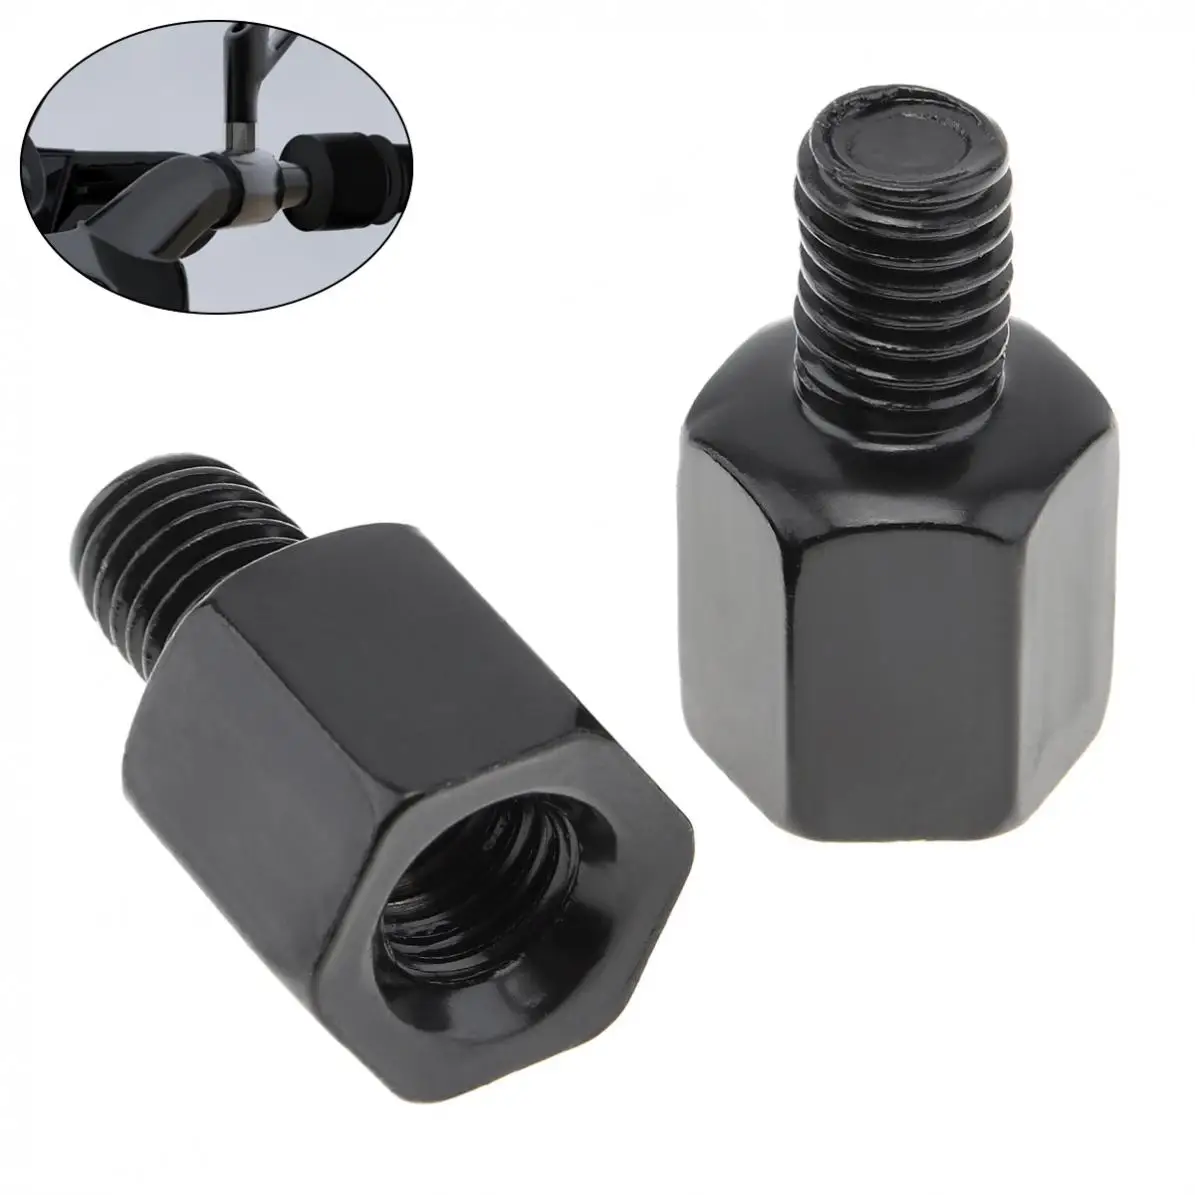 Details about   Motor Postive 8mm to 8mm clockwise Thread Rear View Mirror Adapter 